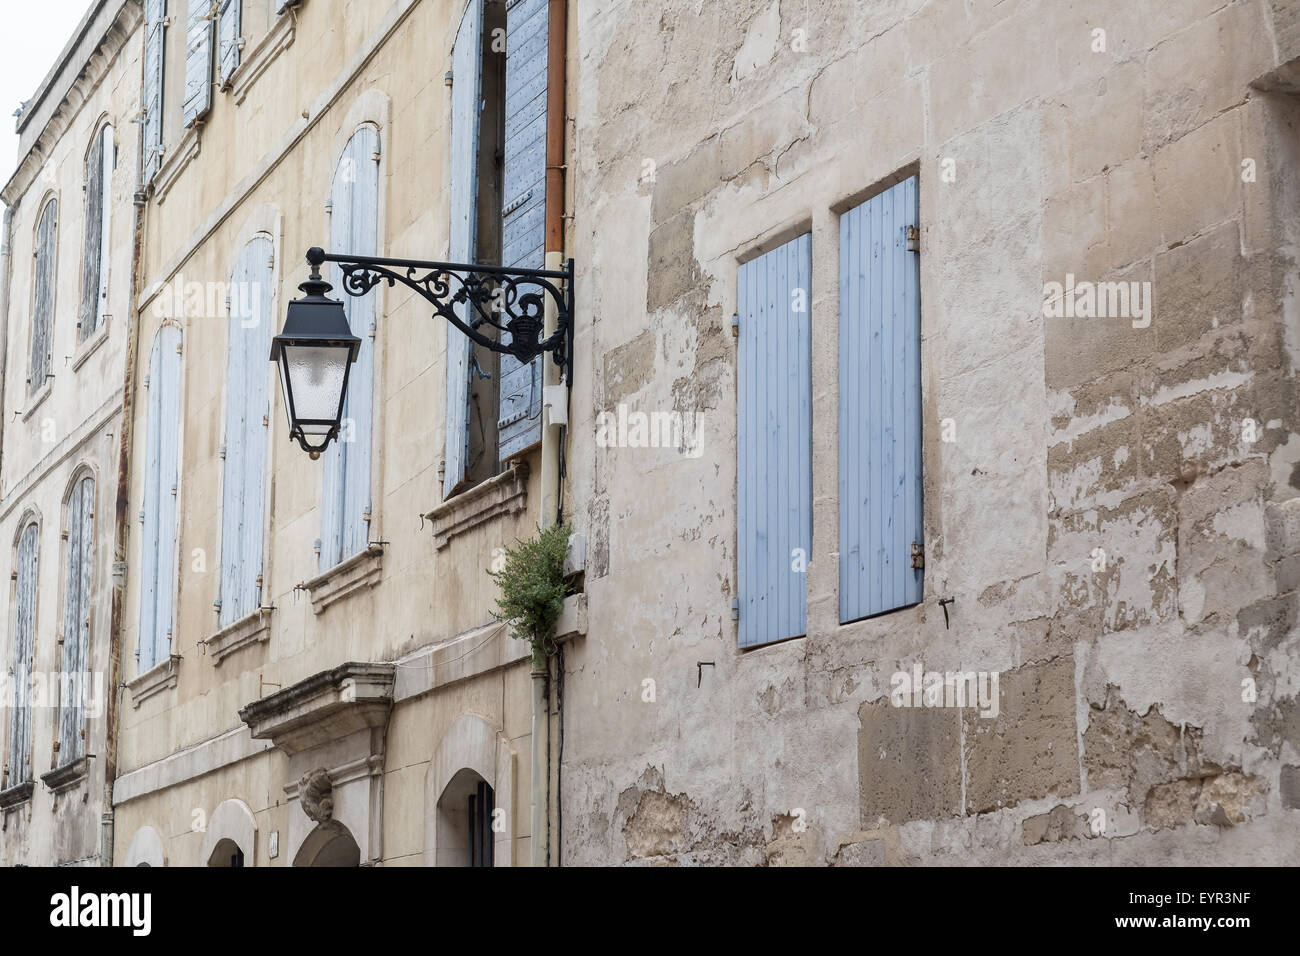 Street in Arles France with old lamp post Stock Photo